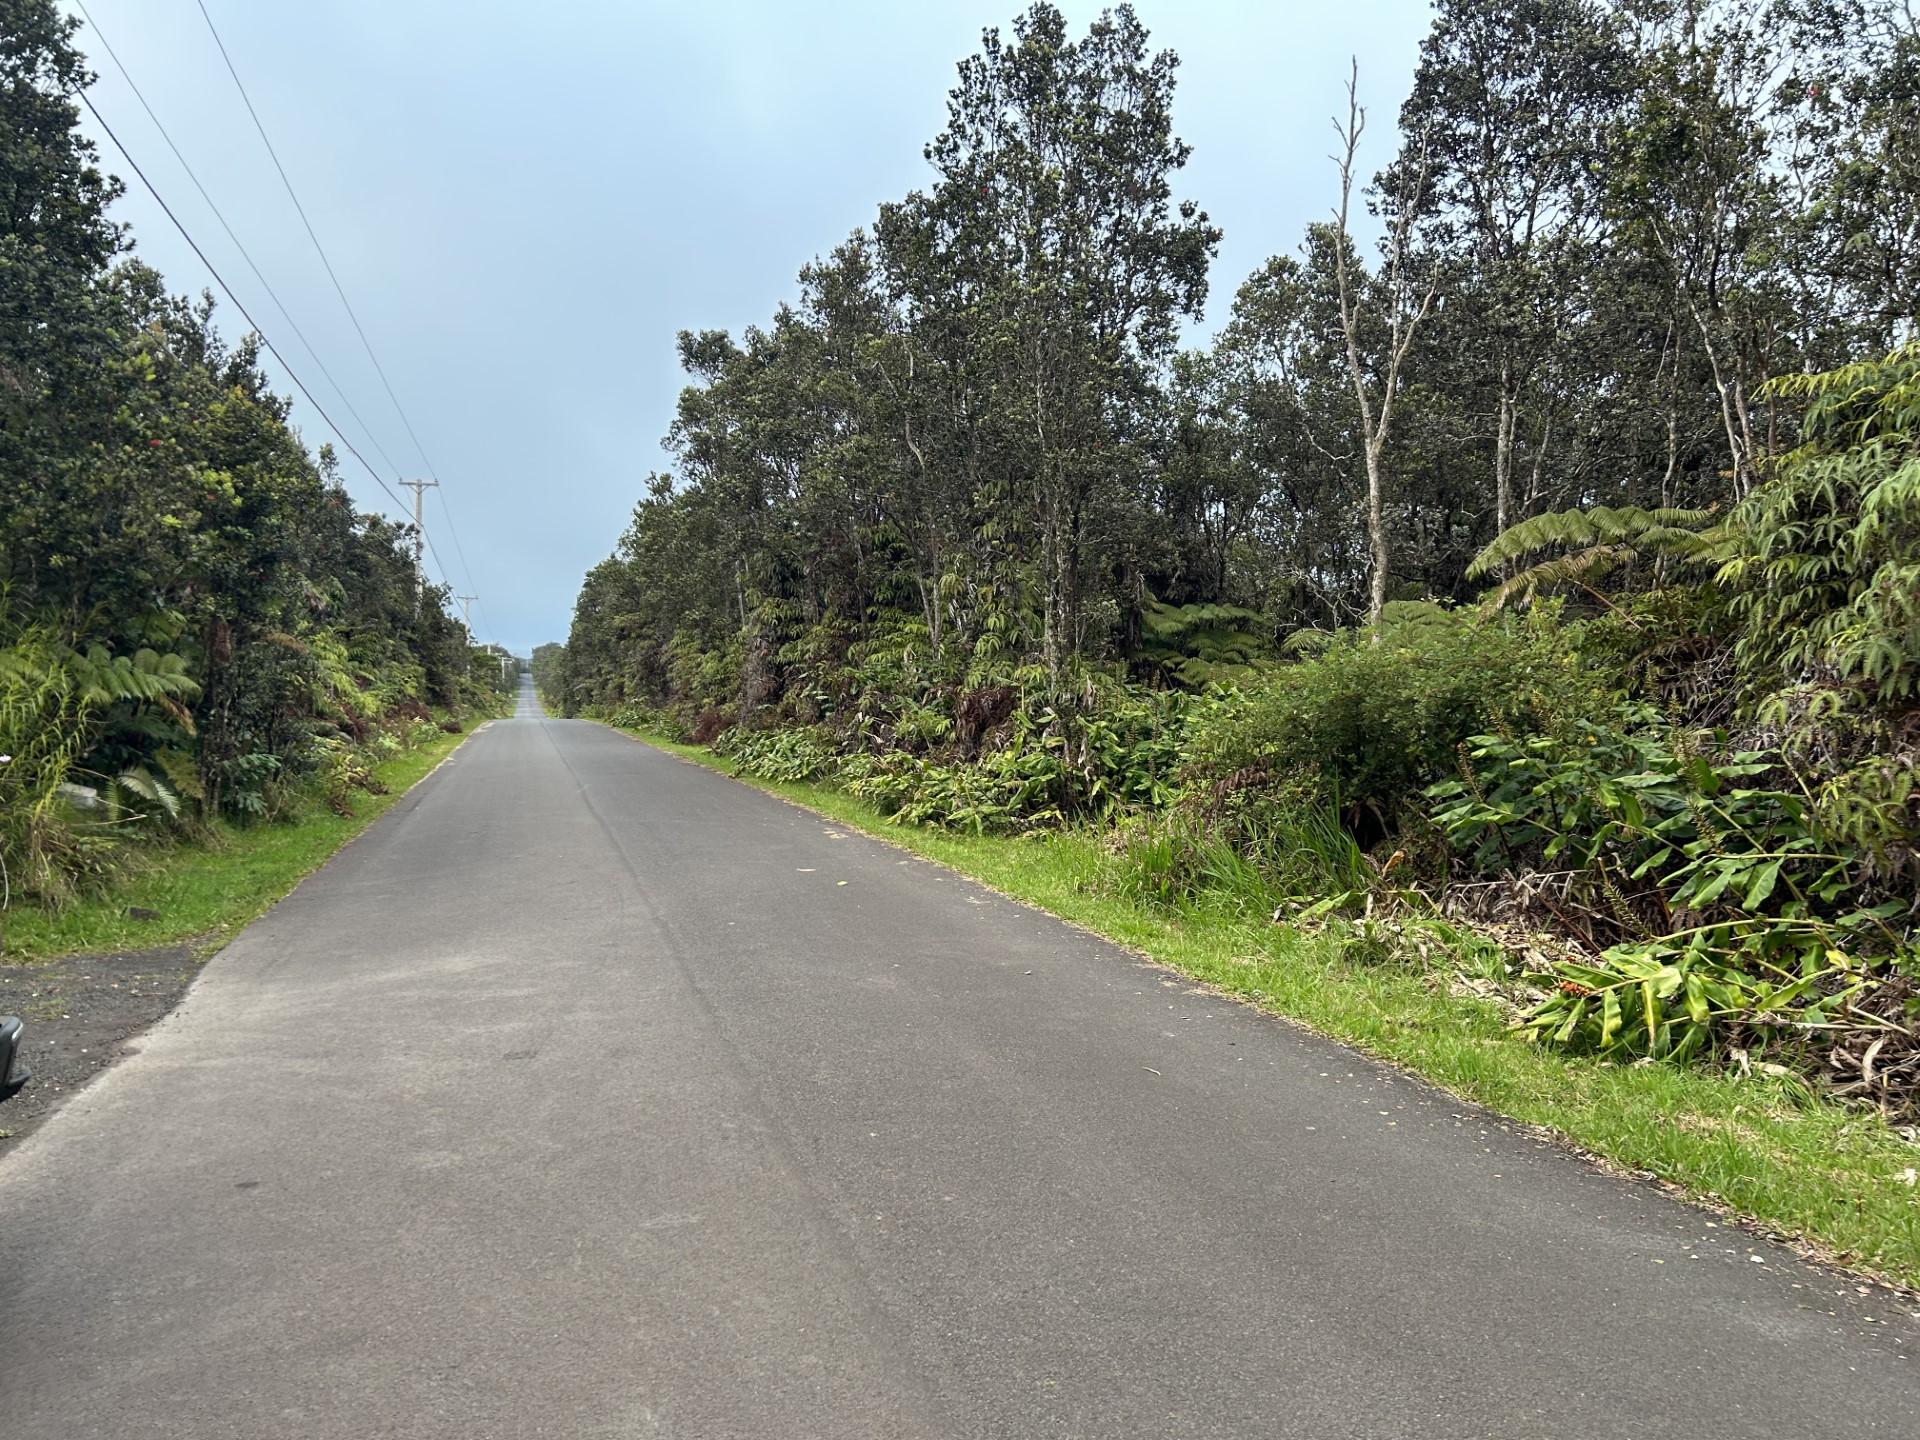 a view of a road with plants and a trees